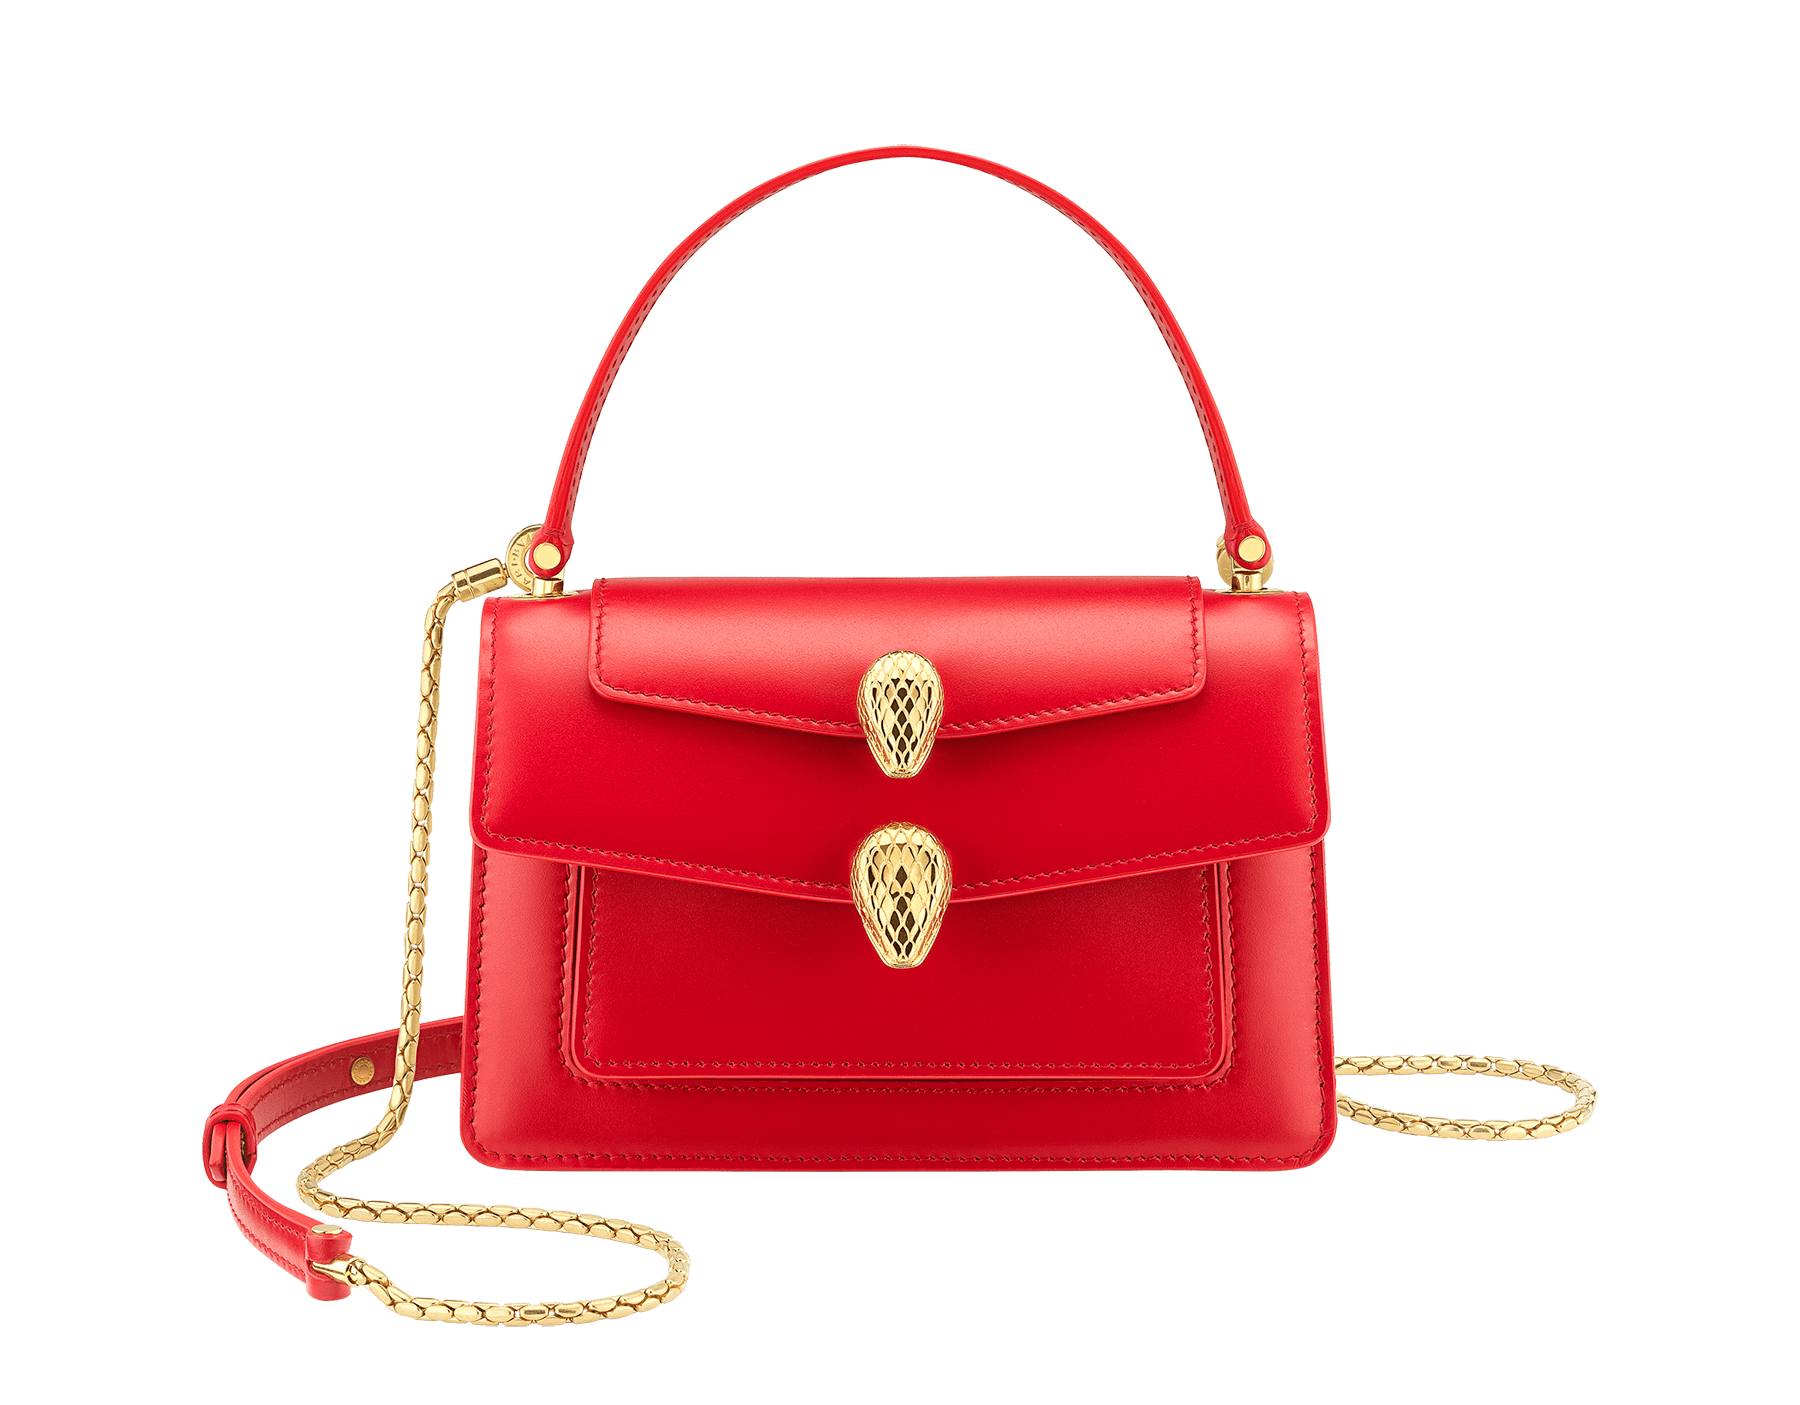 "Alexander Wang x Bvlgari" belt bag in smooth Amaranth Garnet red calfskin. New double Serpenti head closure in antique gold-plated brass with alluring red enamel eyes. 291170 image 1